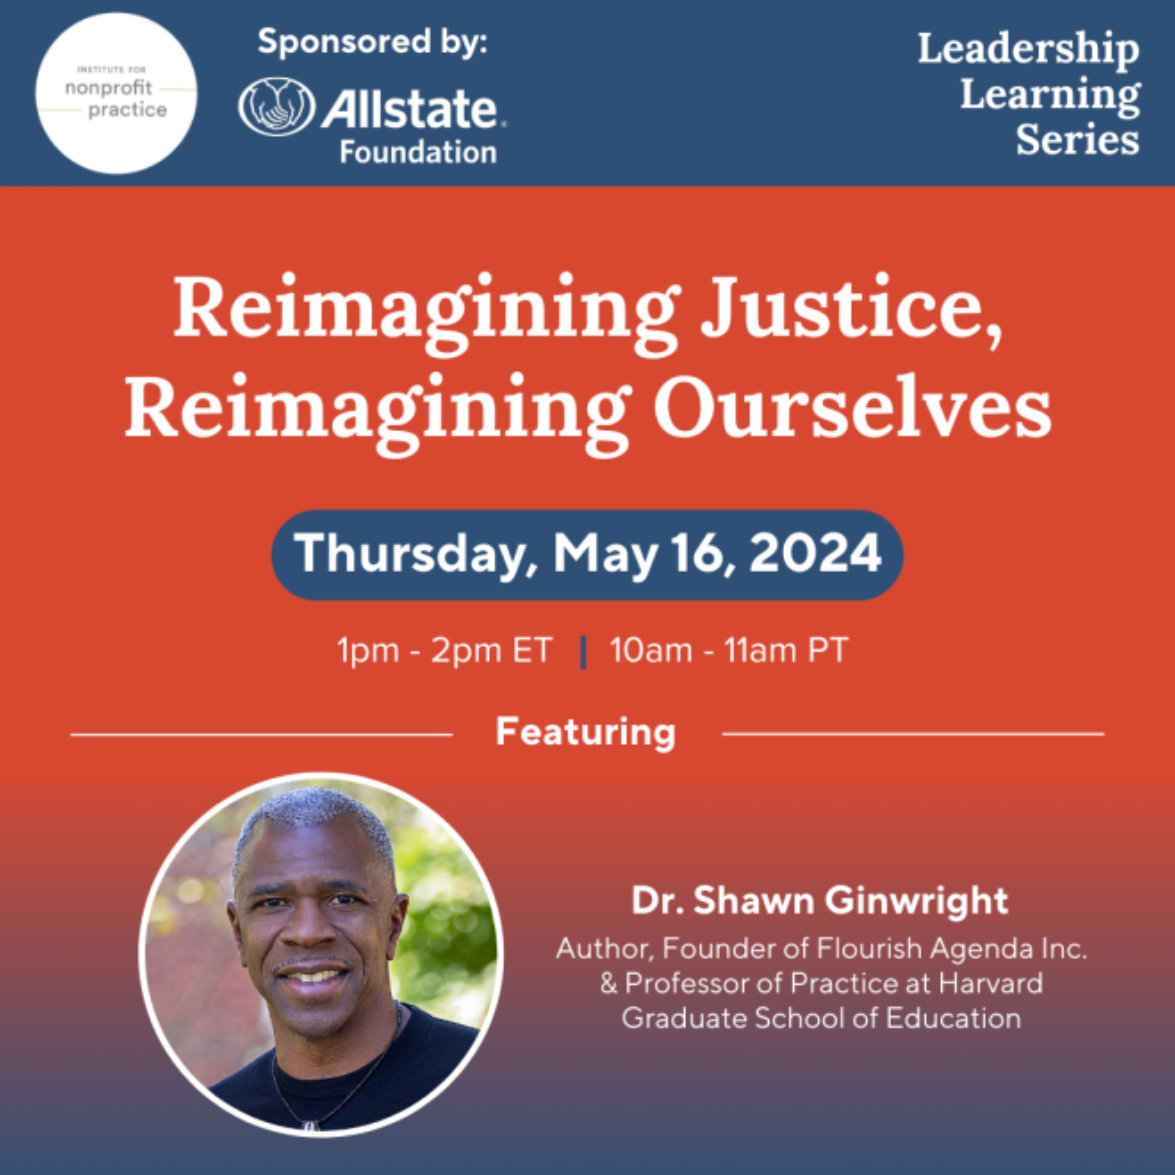 Reimagining Justice, Reimagining Ourselves with Dr. Shawn Ginwright